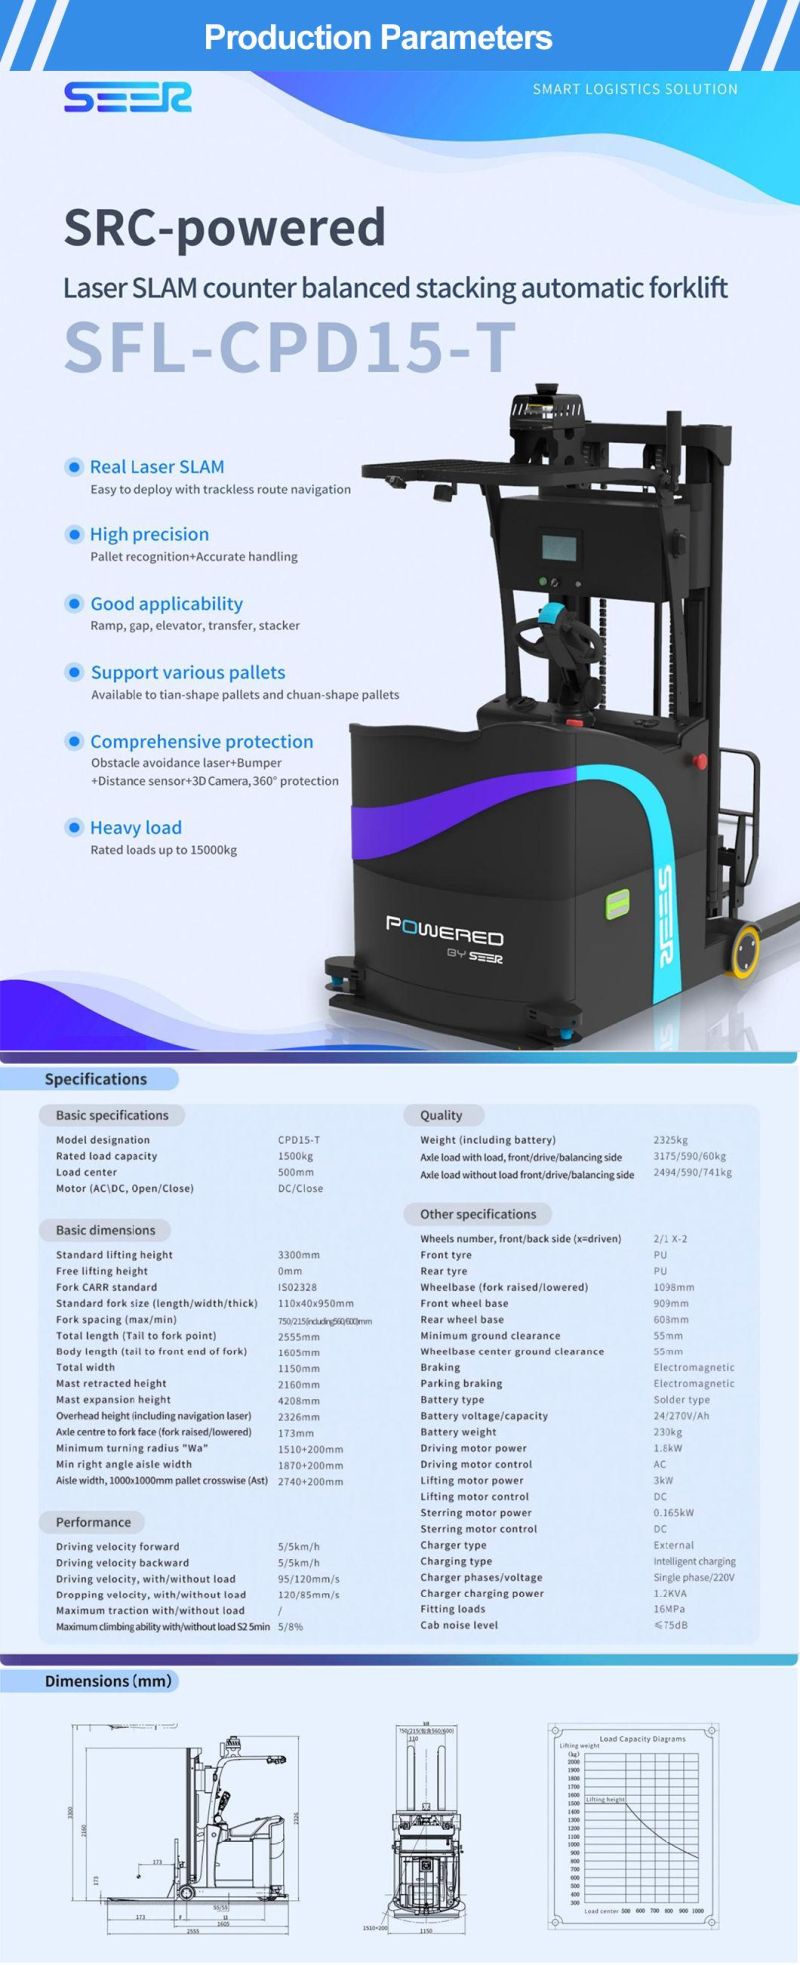 High-End Product Automatic Src-Powered Laser Slam Small Stacker Forklift Sfl-Cdd14 with Great Materials